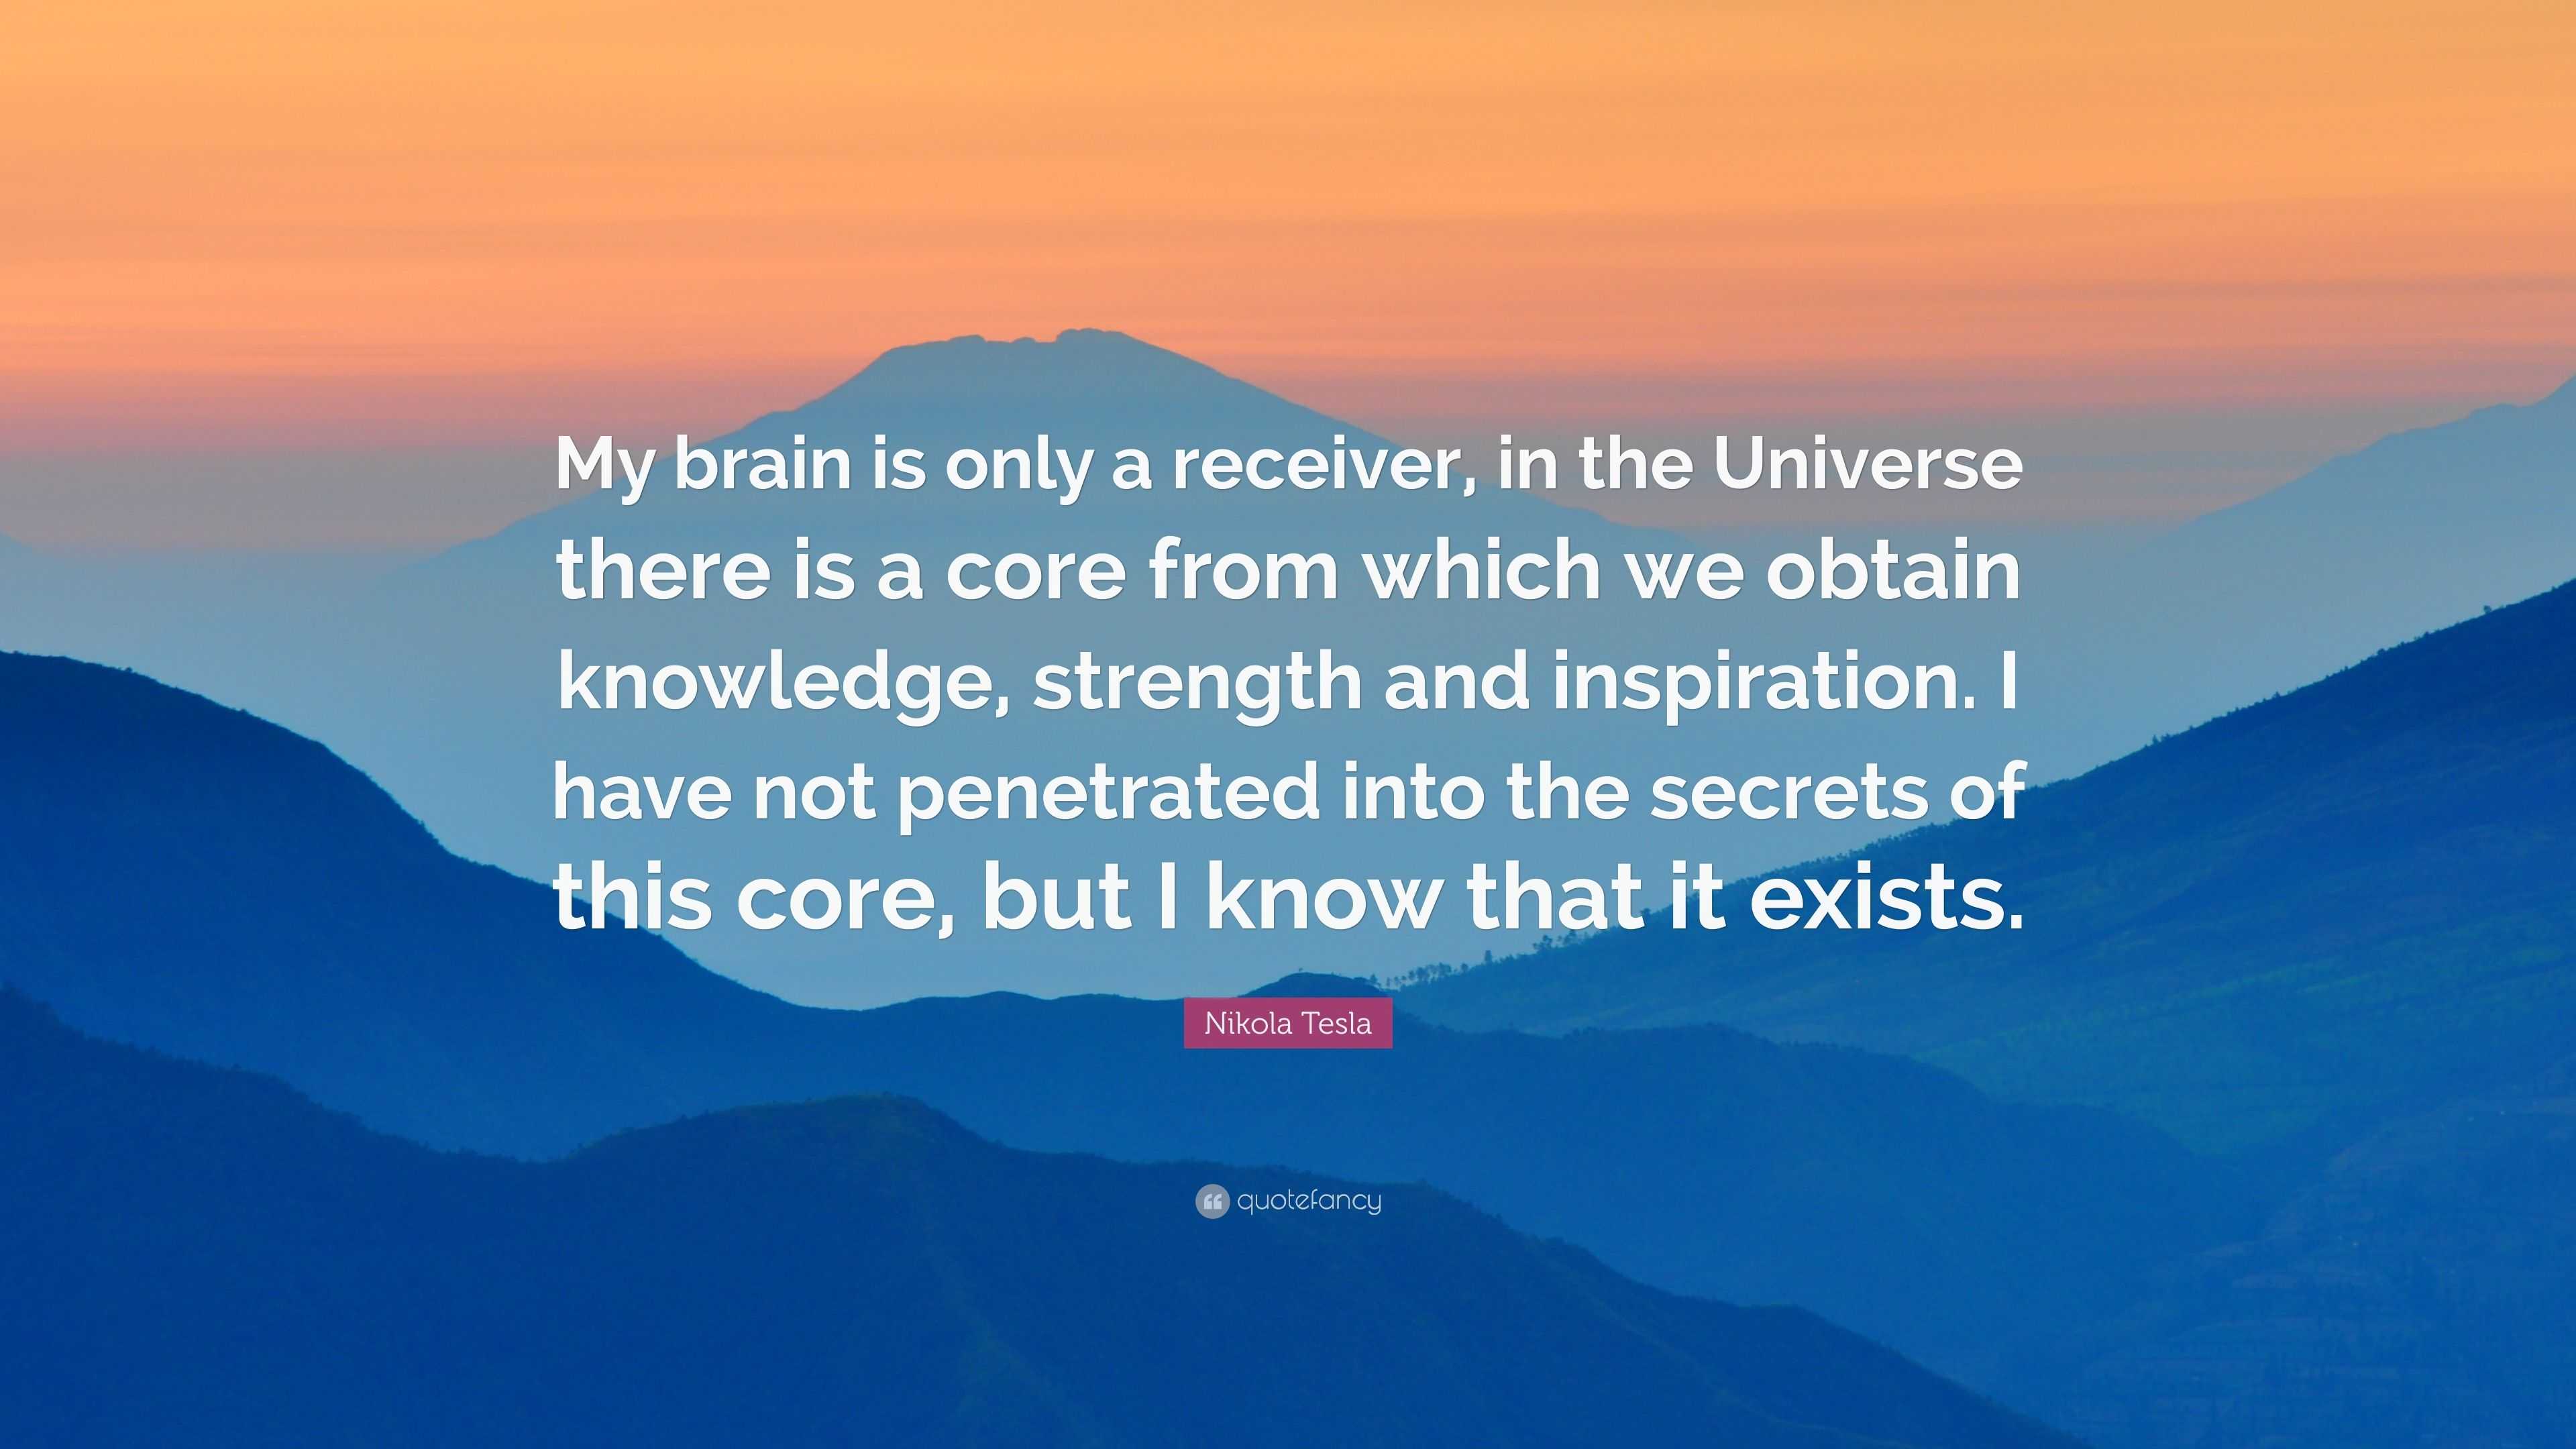 Nikola Tesla Quote: “My brain is only a receiver, in the Universe there